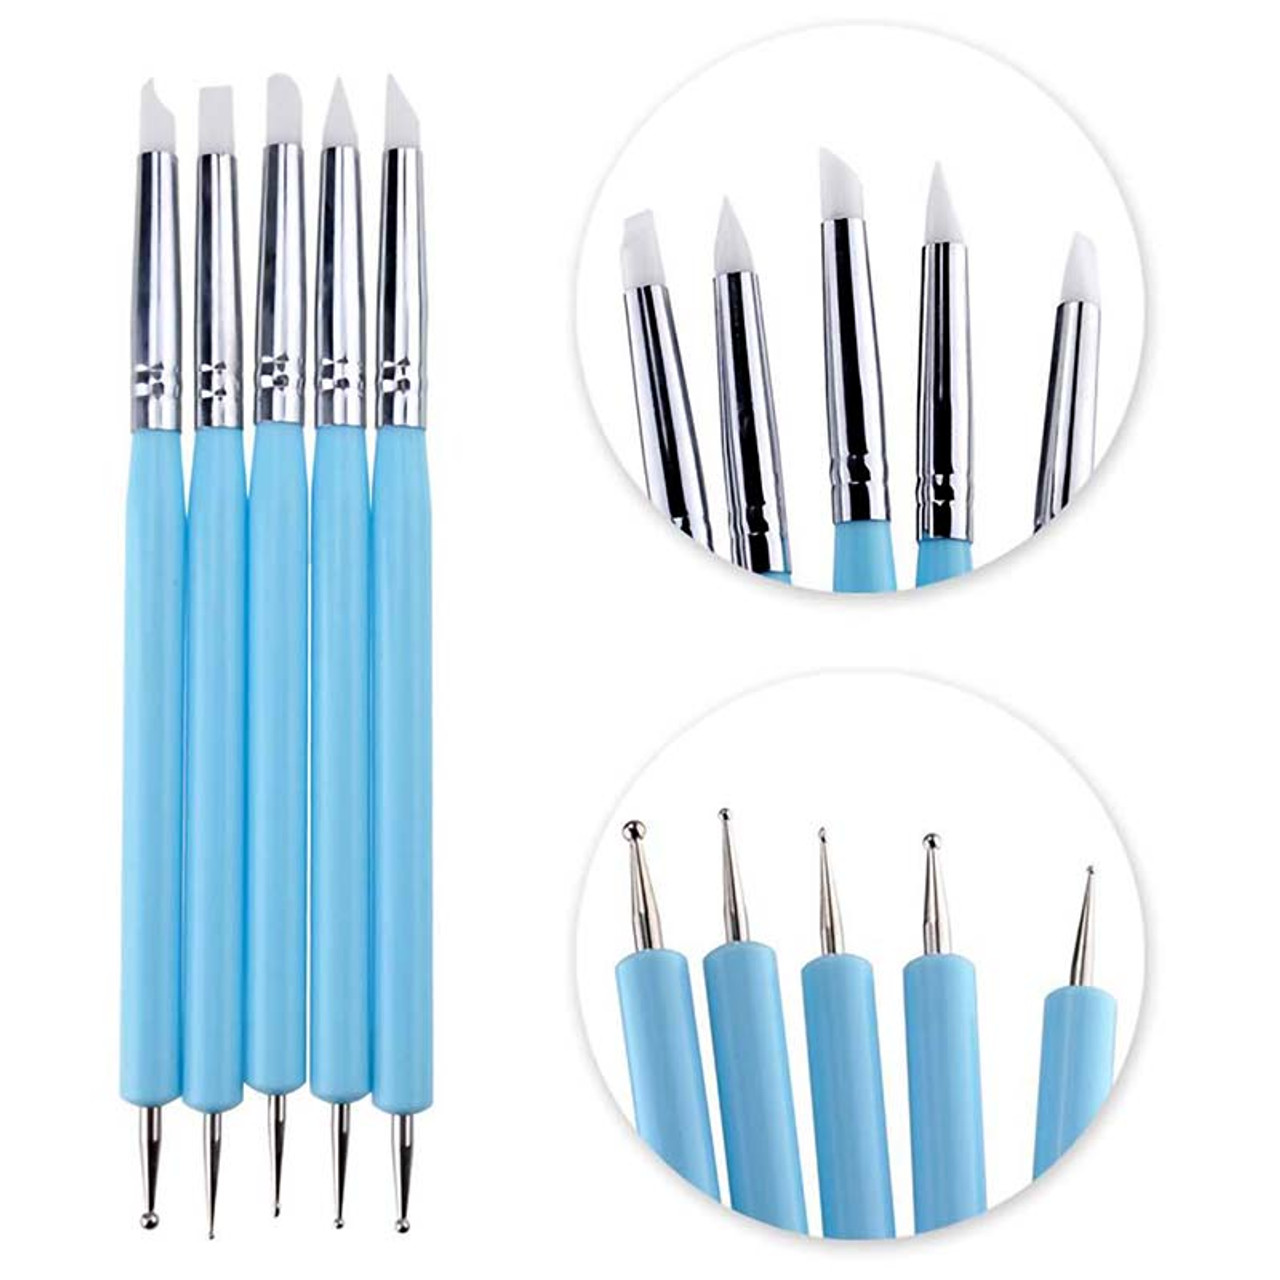 Dotting Tool Set for Nail Art & Clay Craft | Small Sculpting & Modeling  Tool | Mandala Painting Tools (Set of 5pcs with Double End Tips)